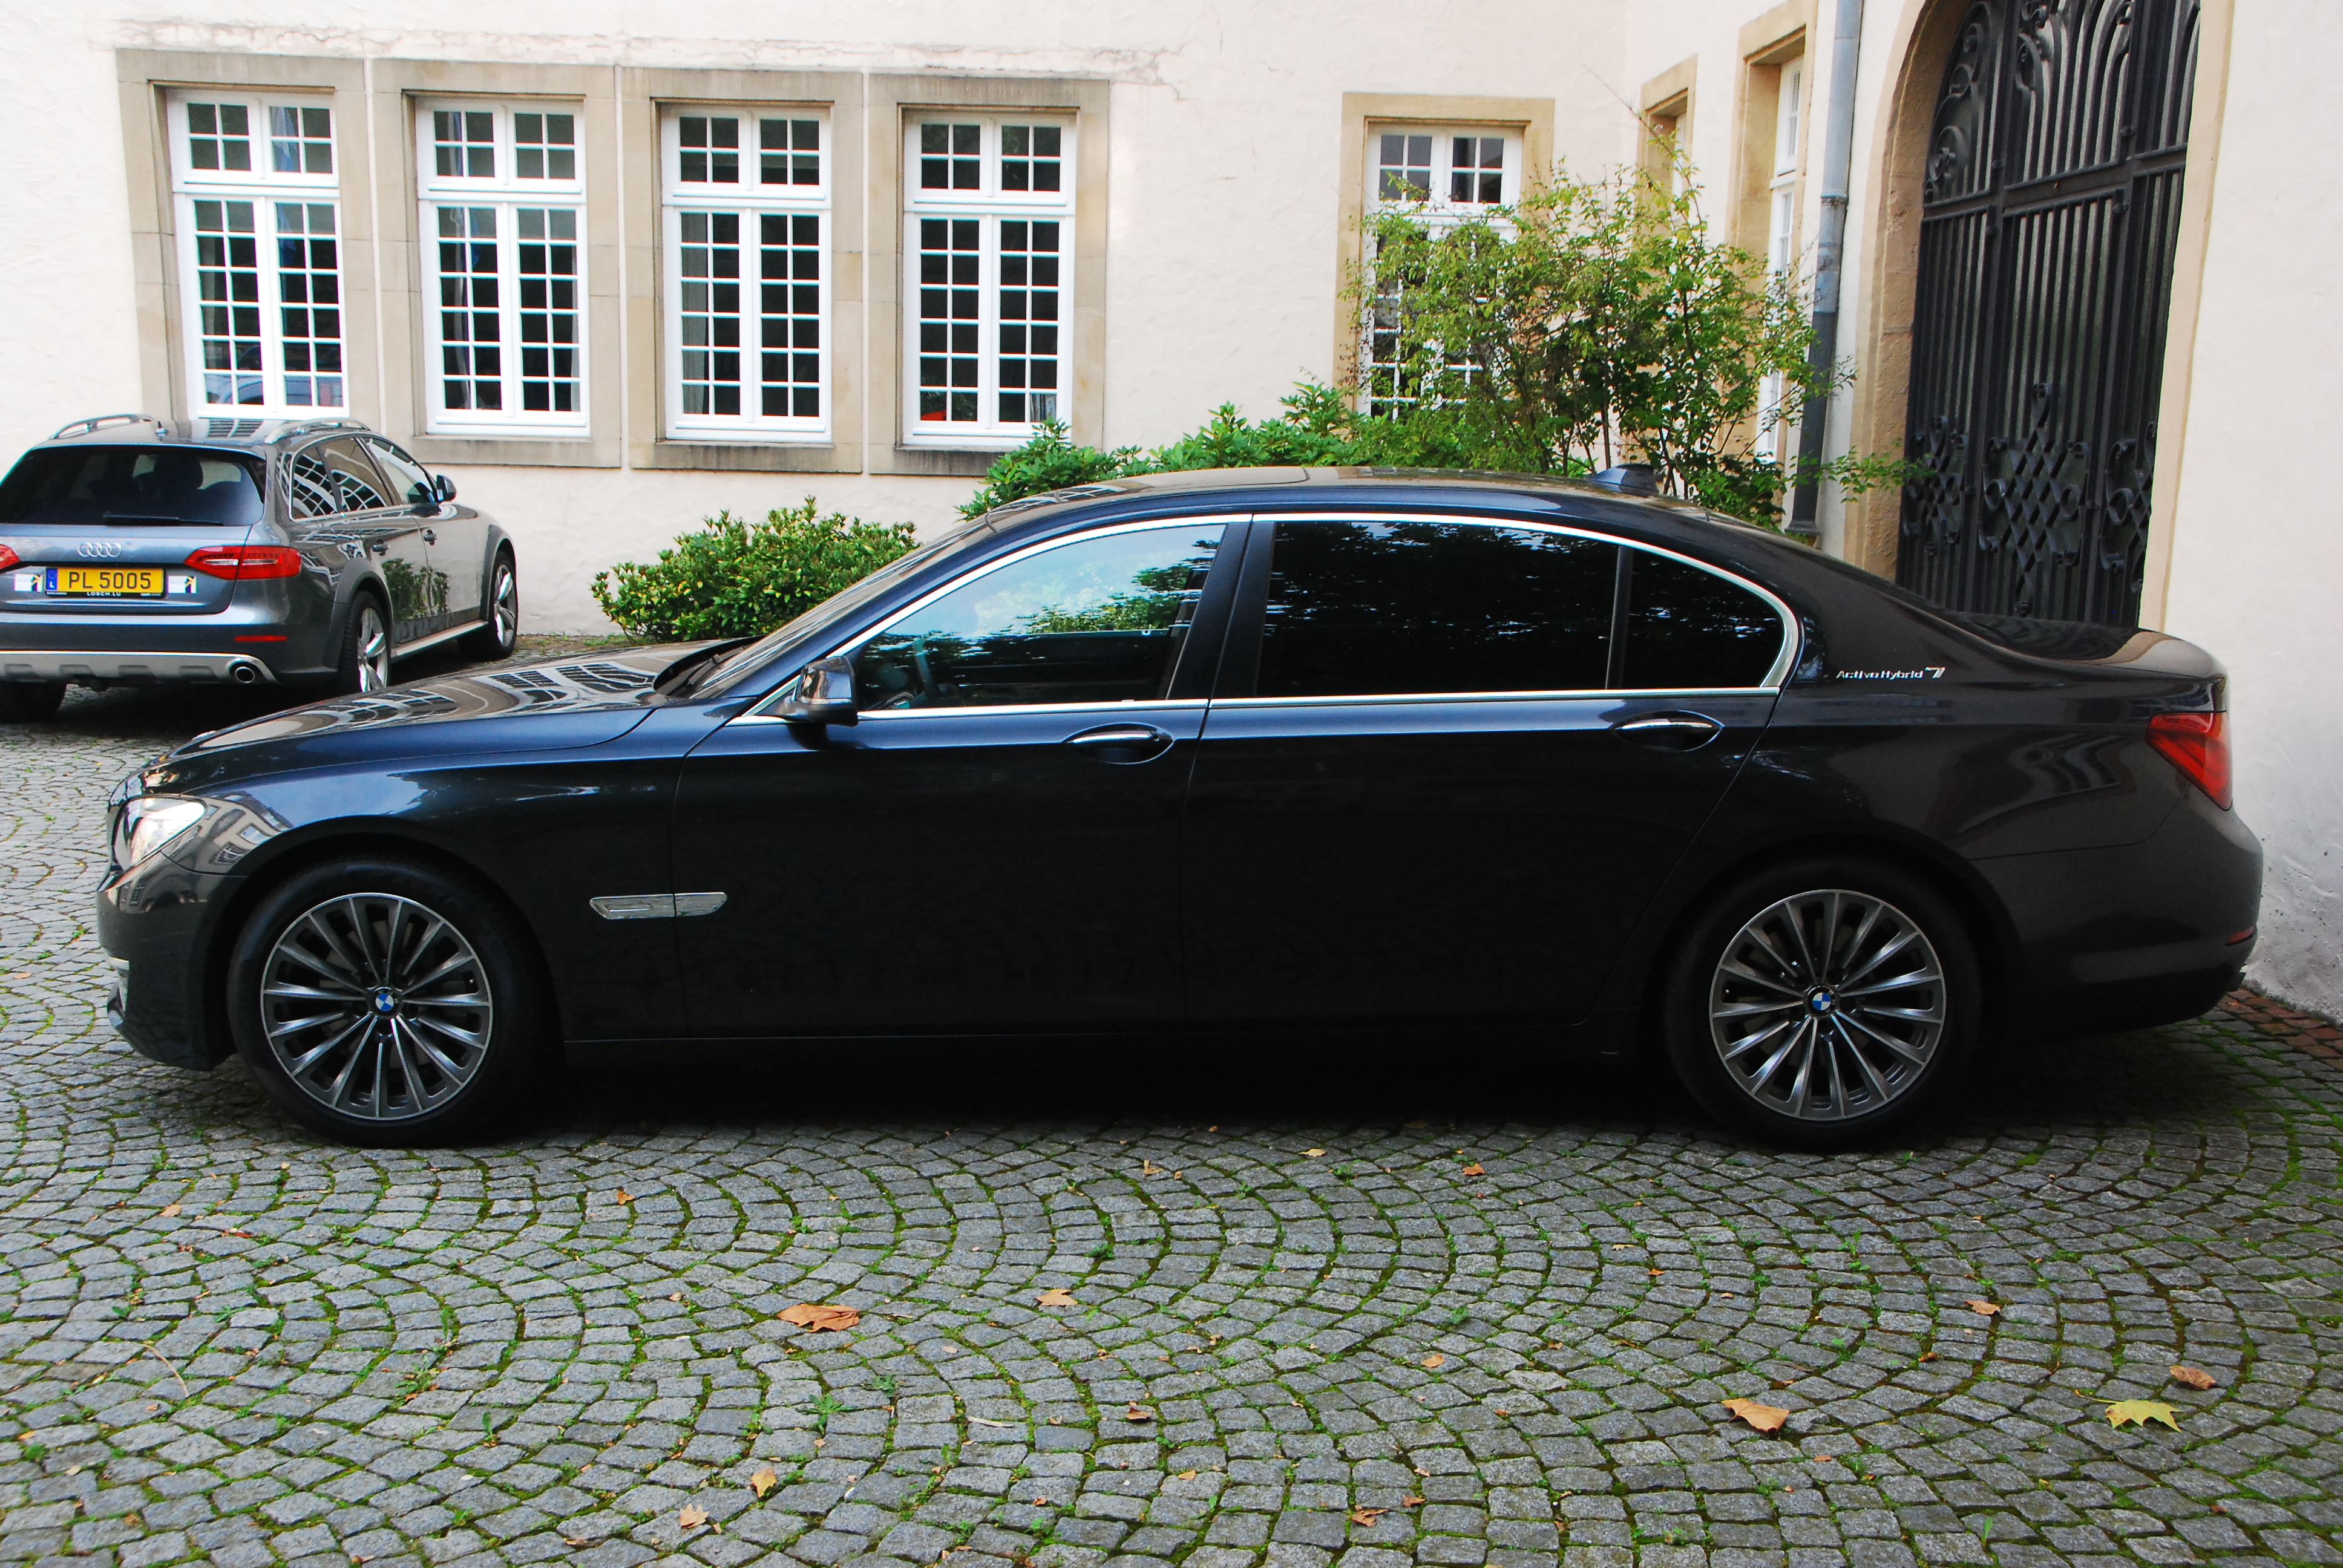 File:BMW ActiveHybrid 7, Luxembourg.jpg - Wikimedia Commons